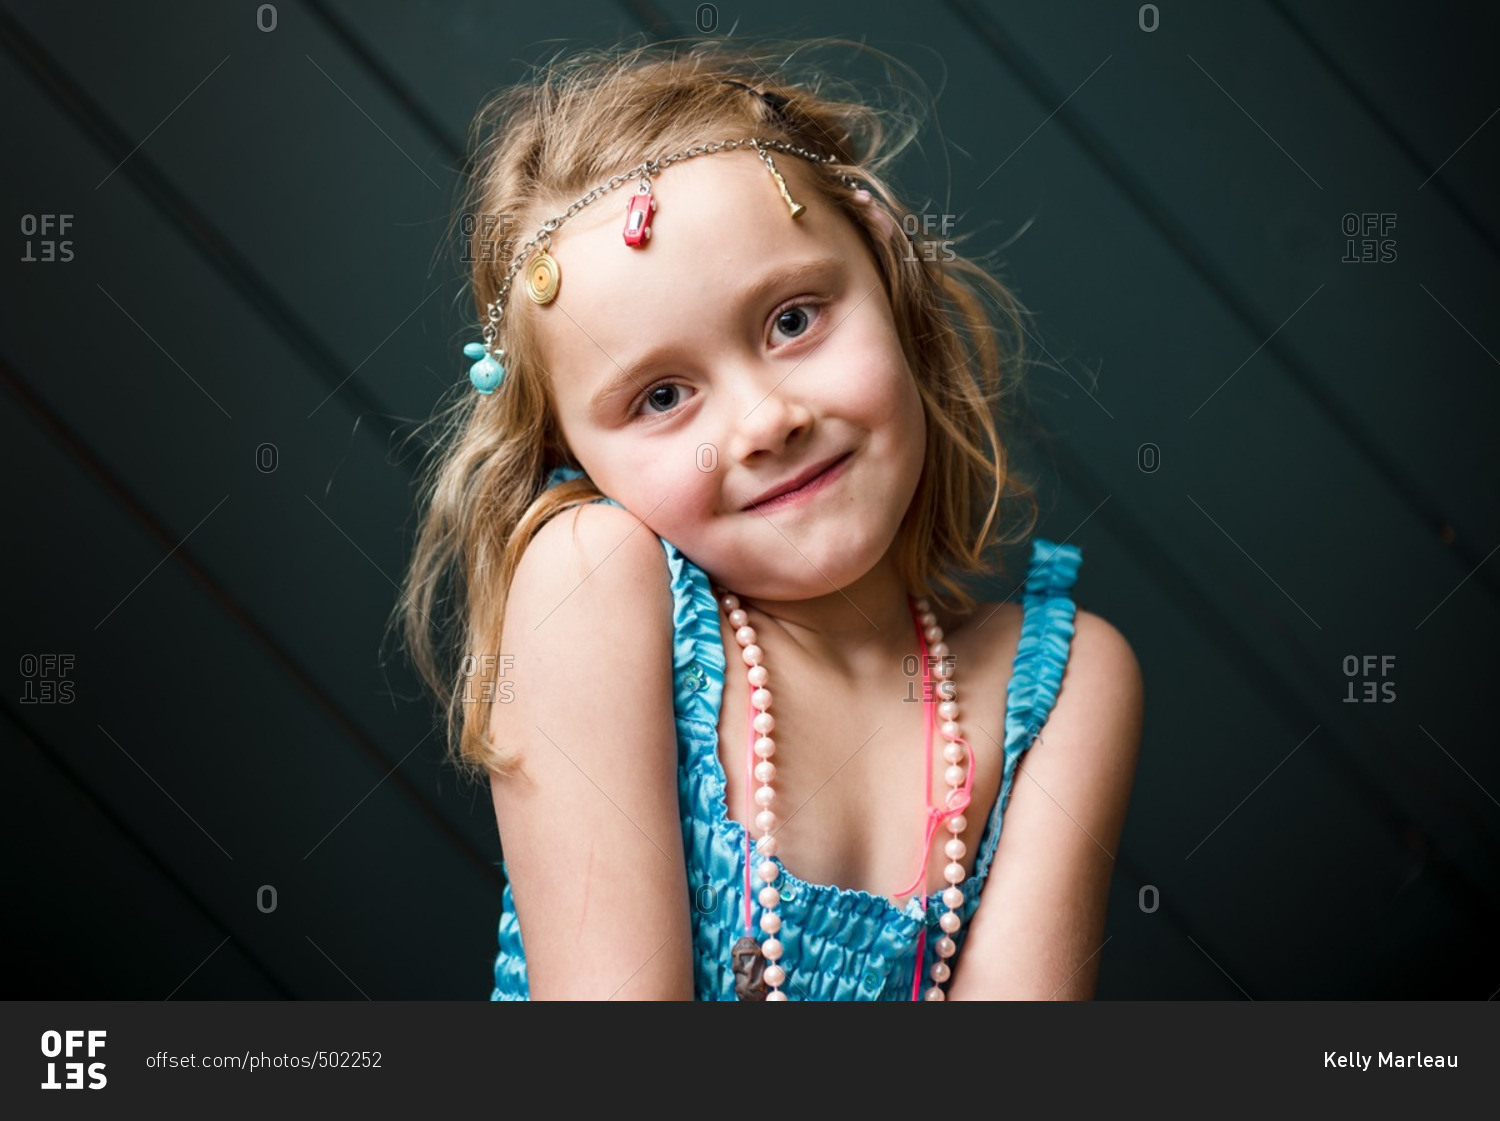 Cute young girl wearing charm necklace as headband